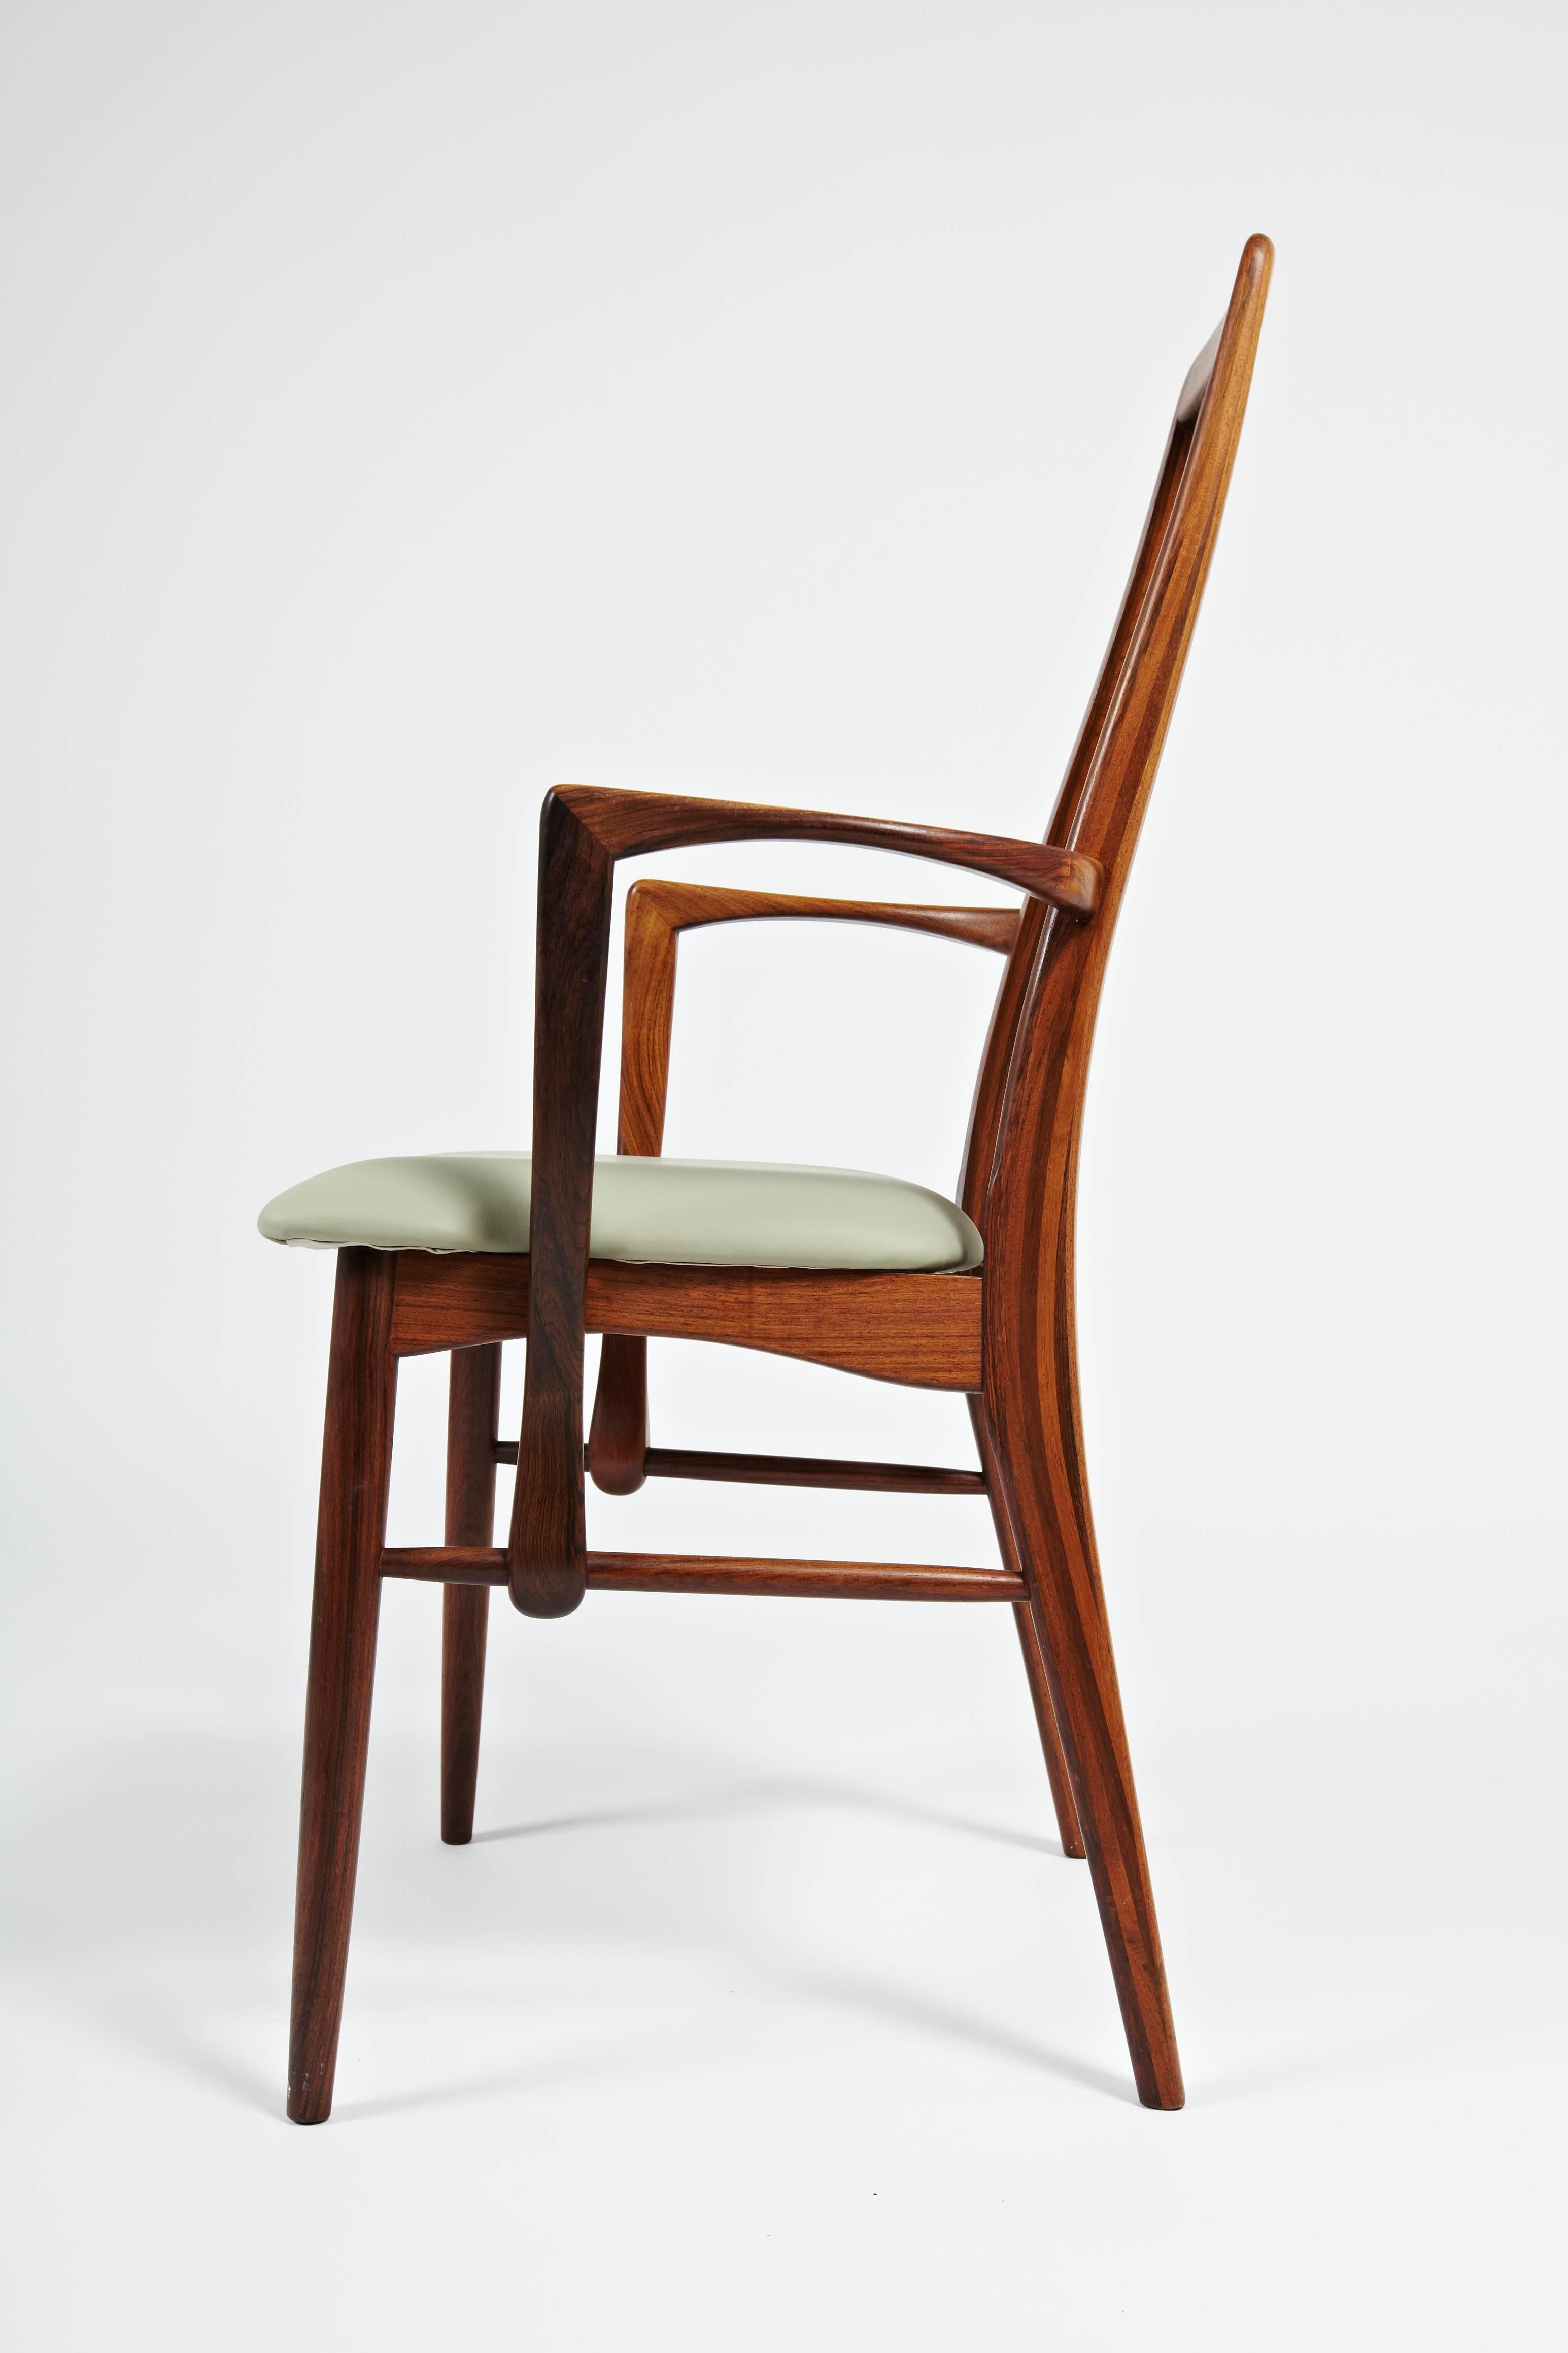 Niels Kofoed Rosewood Dining Chair with Arms, circa 1964 For Sale 2